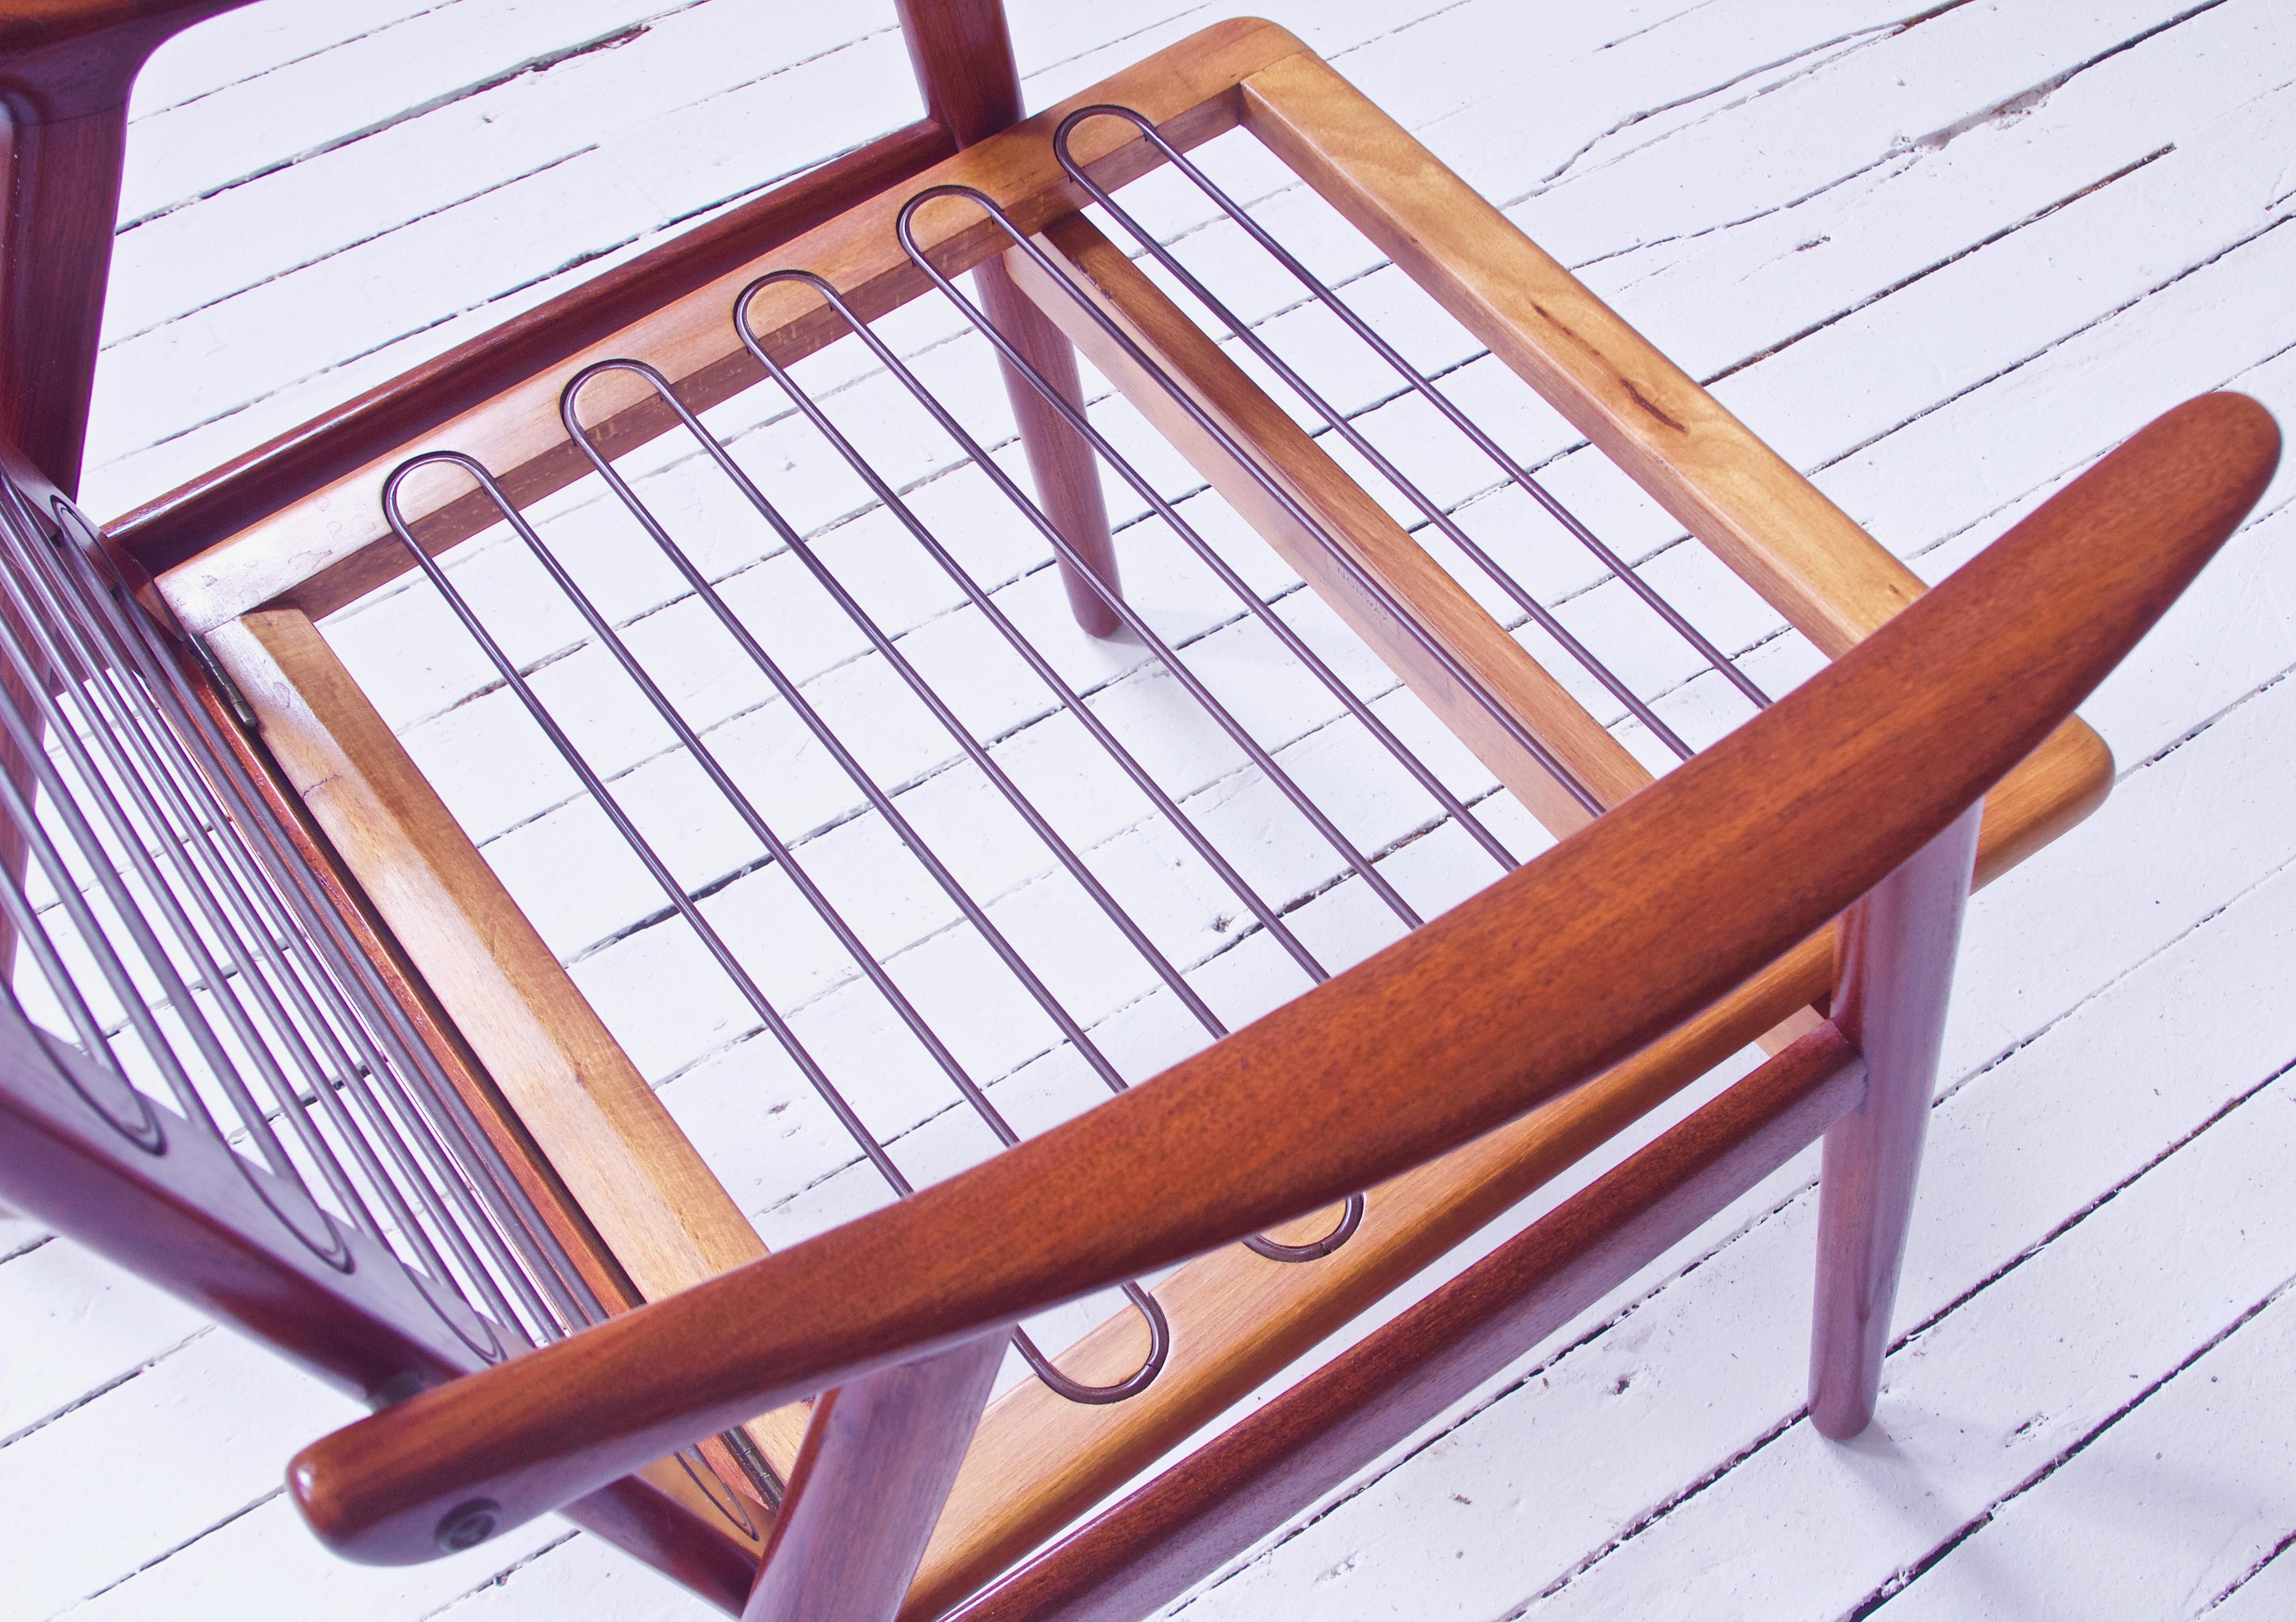 Vintage Fredrik A. Kayser Teak, Leather & Brass Easy Chair #563, Norway, 1950s For Sale 2